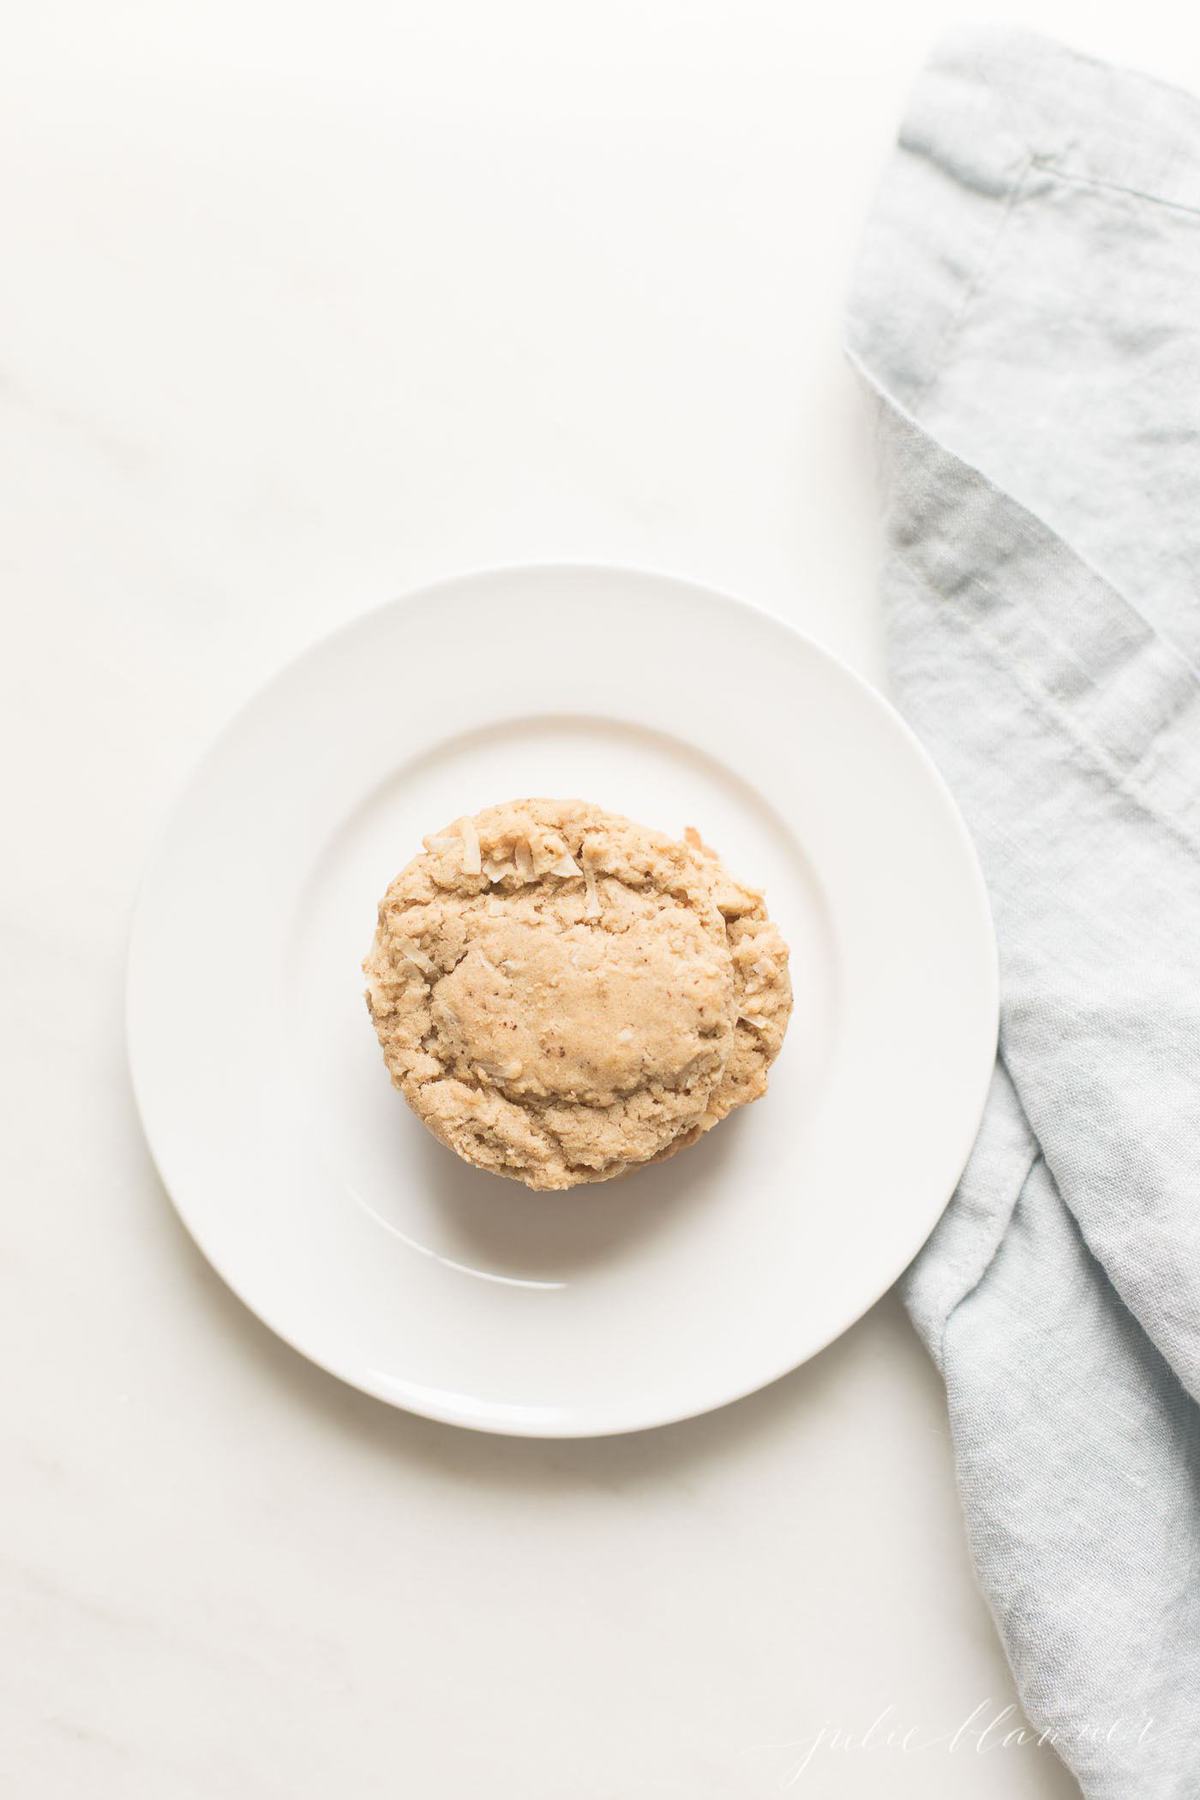 An oatmeal christmas cookie on a white plate.